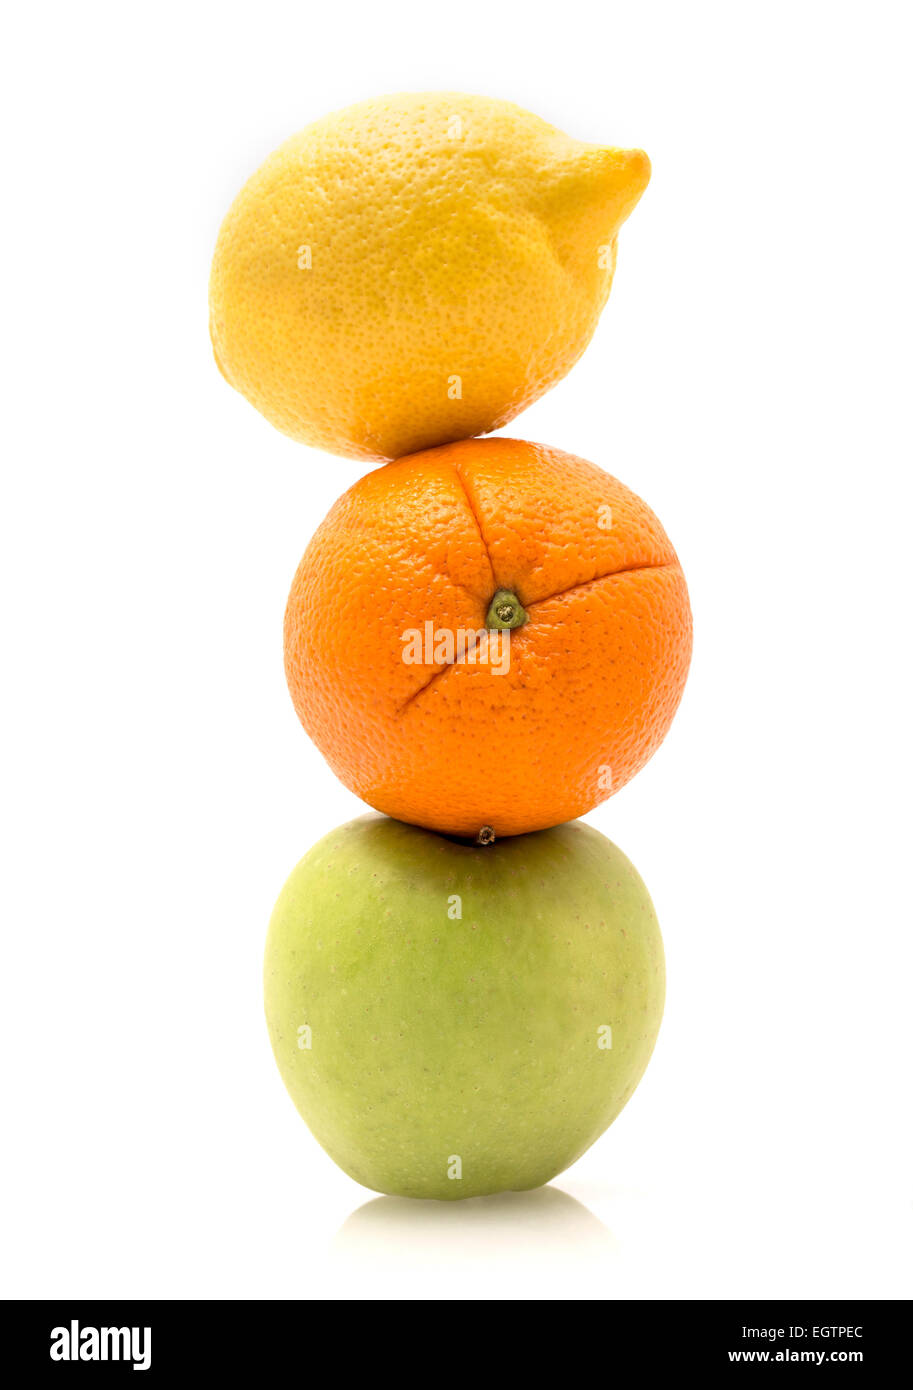 Apple, orange and lemon, stacked, with a white background. Stock Photo